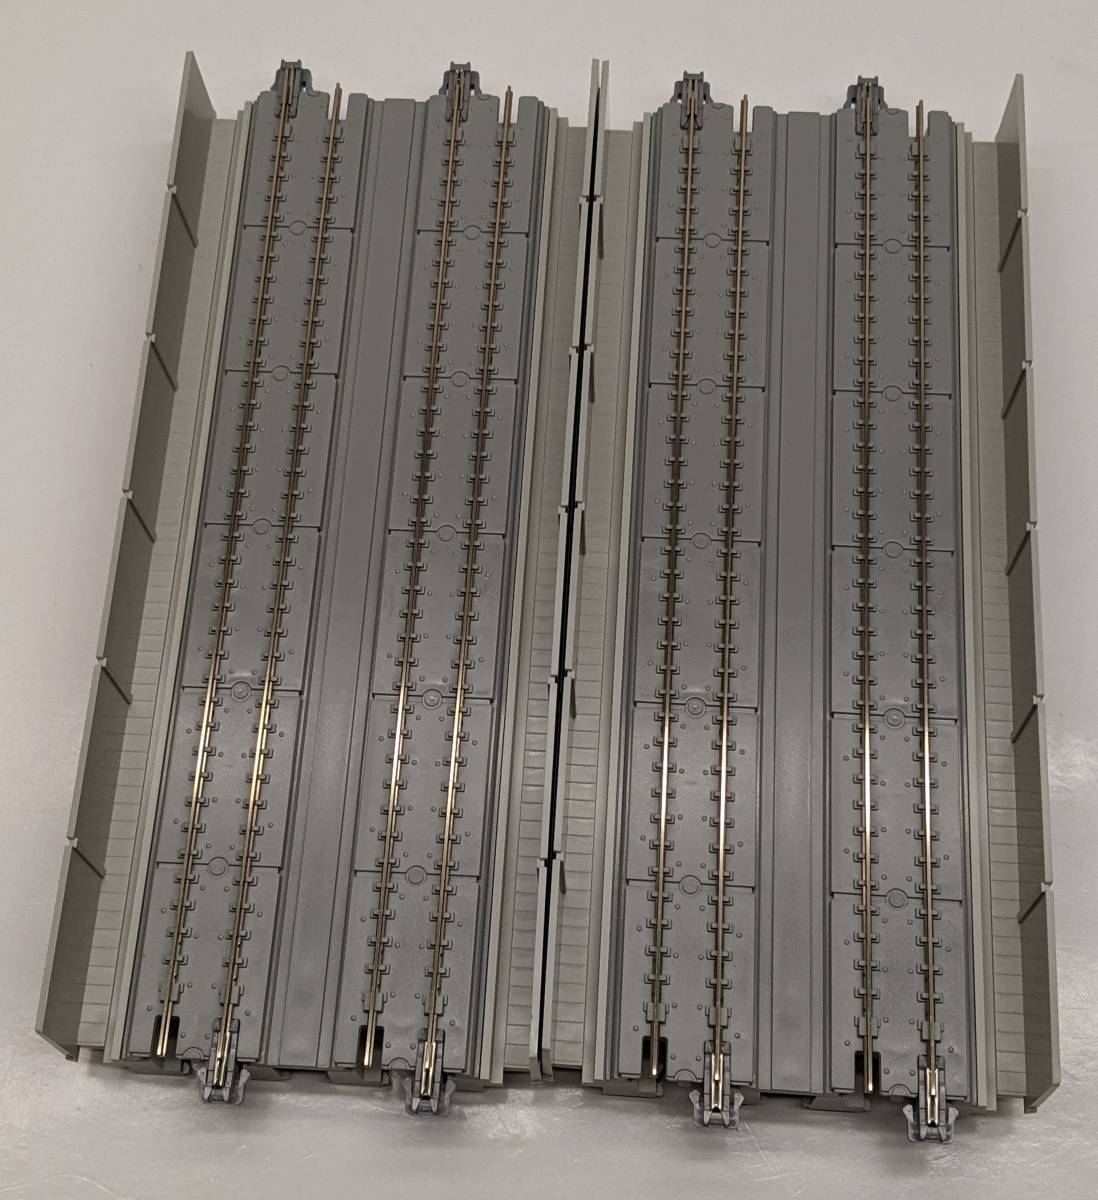 KATO 20-411 Ws186v Double Track Straight Viaduct 186mm Unitrack N Scale for sale online 